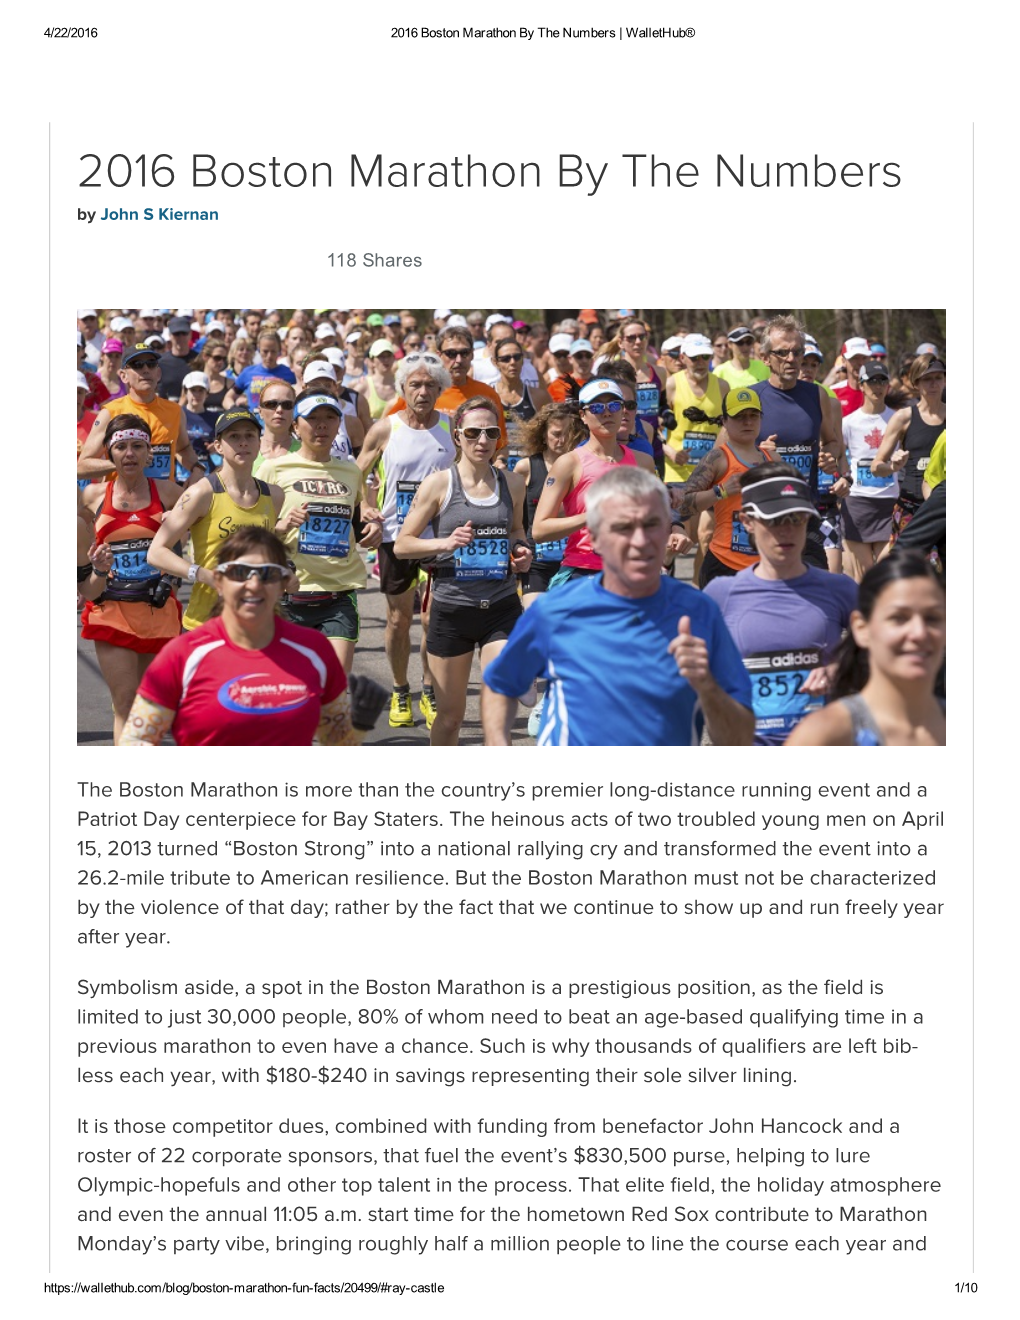 2016 Boston Marathon by the Numbers | Wallethub®